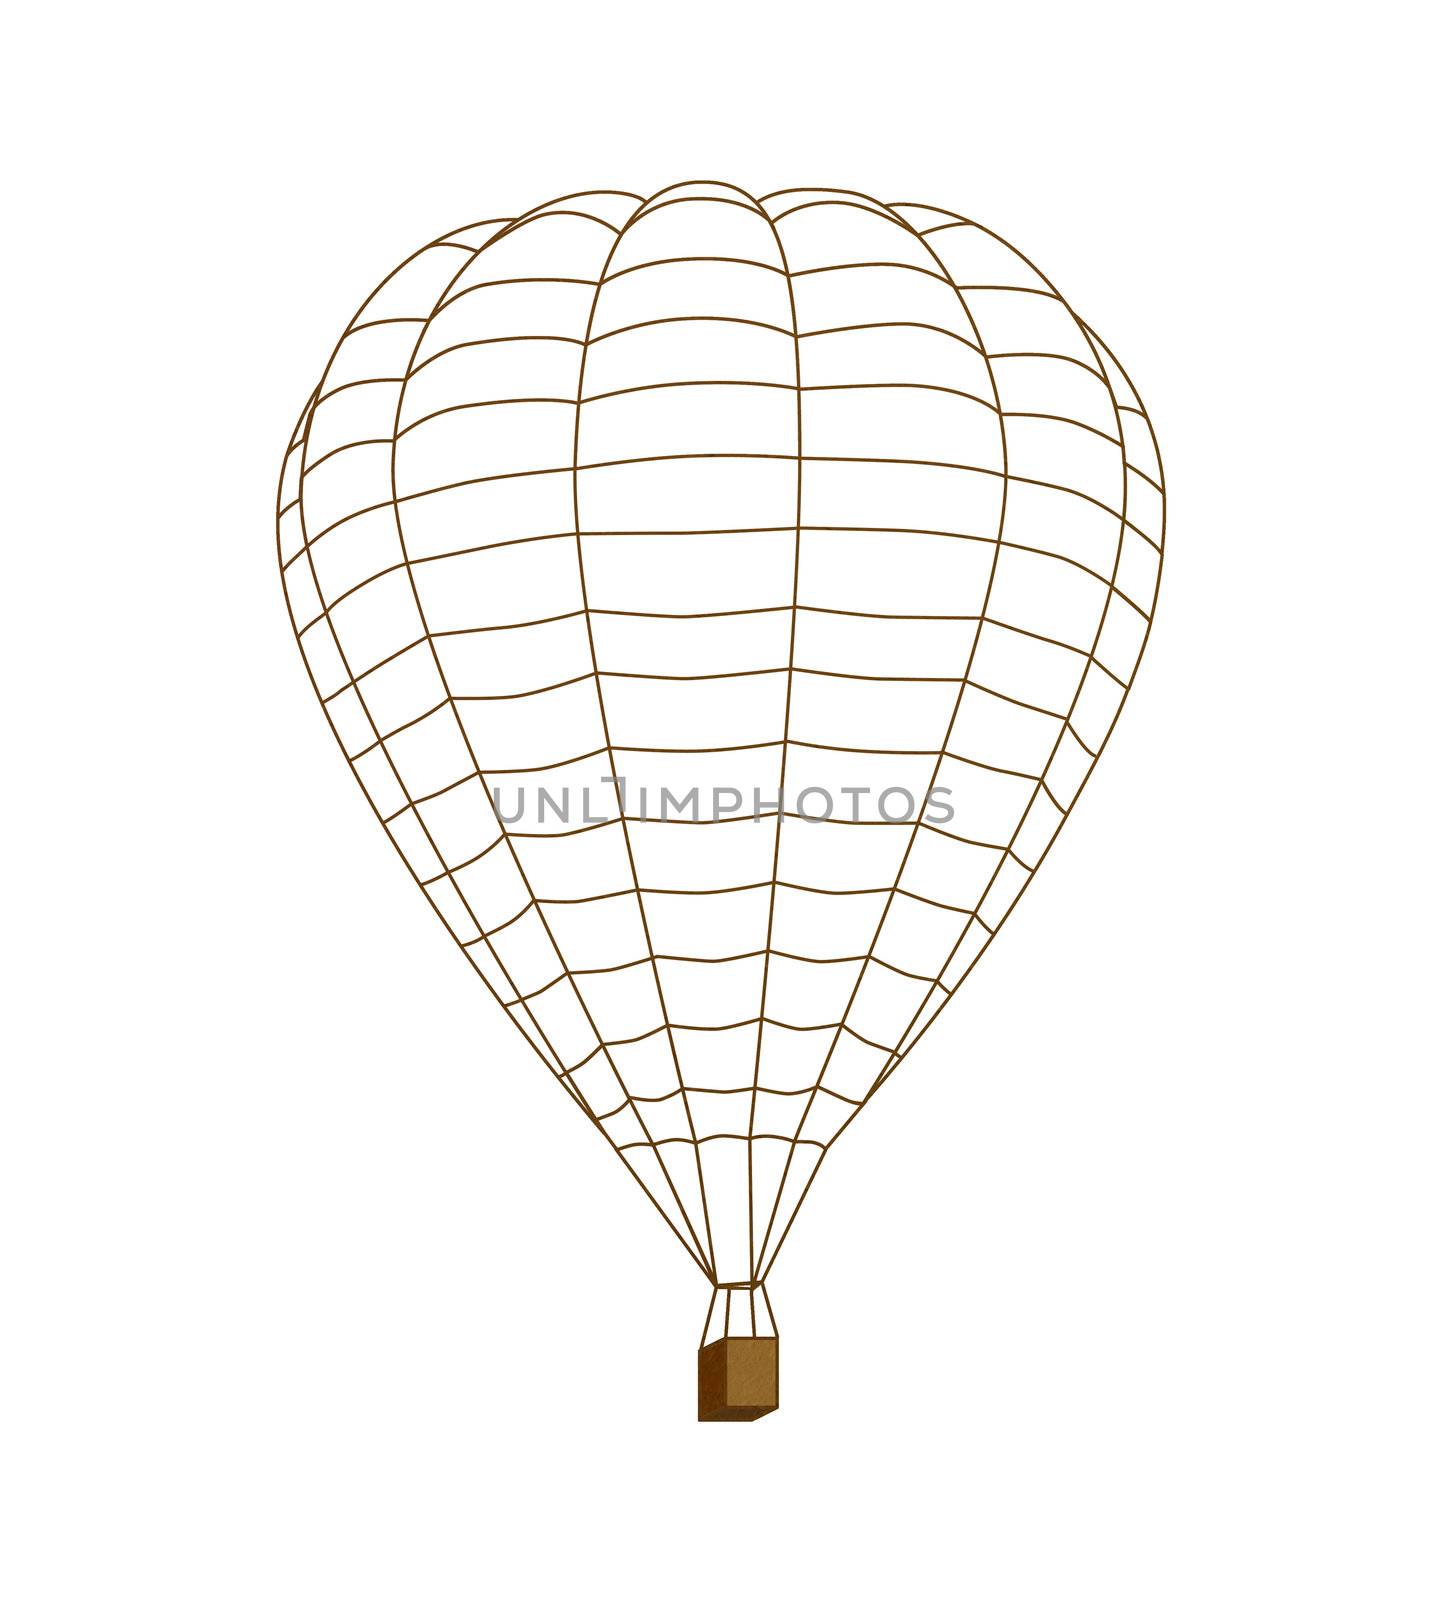 Balloon made from mulberry Paper on white background. 